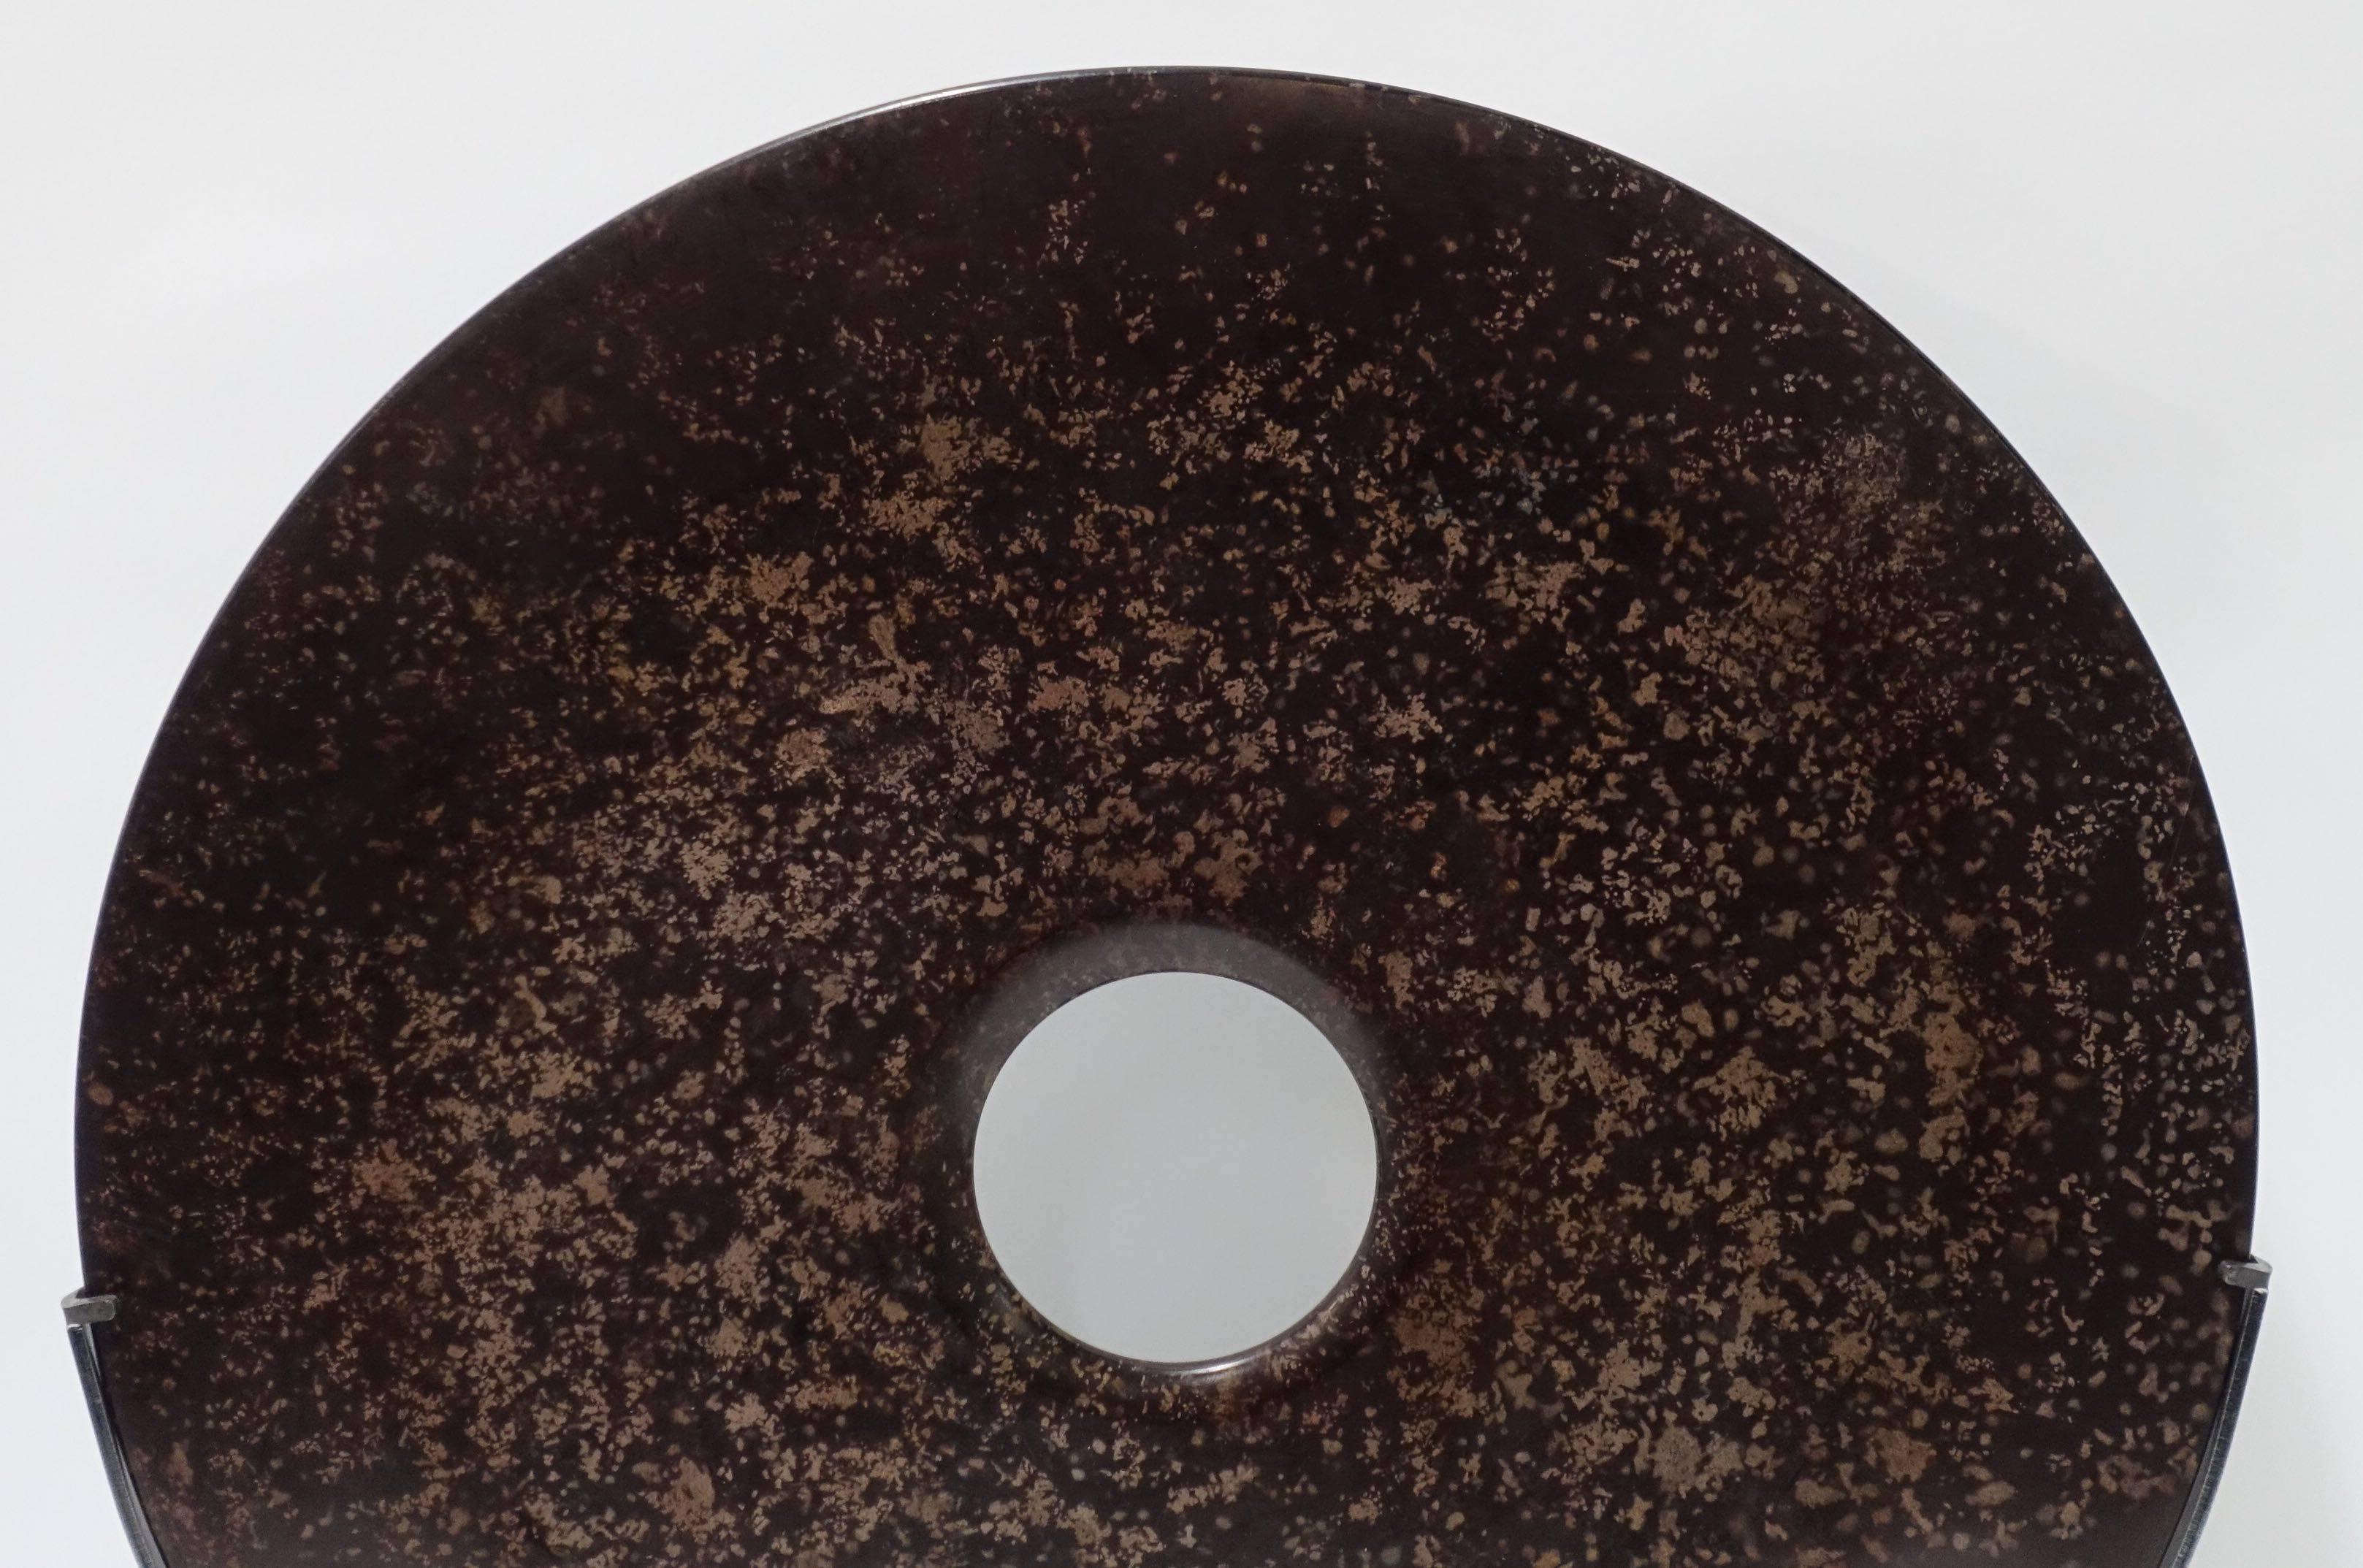 Contemporary Chinese two brown polished stone discs on stands.
Measures: The large is smooth and speckled in color 16